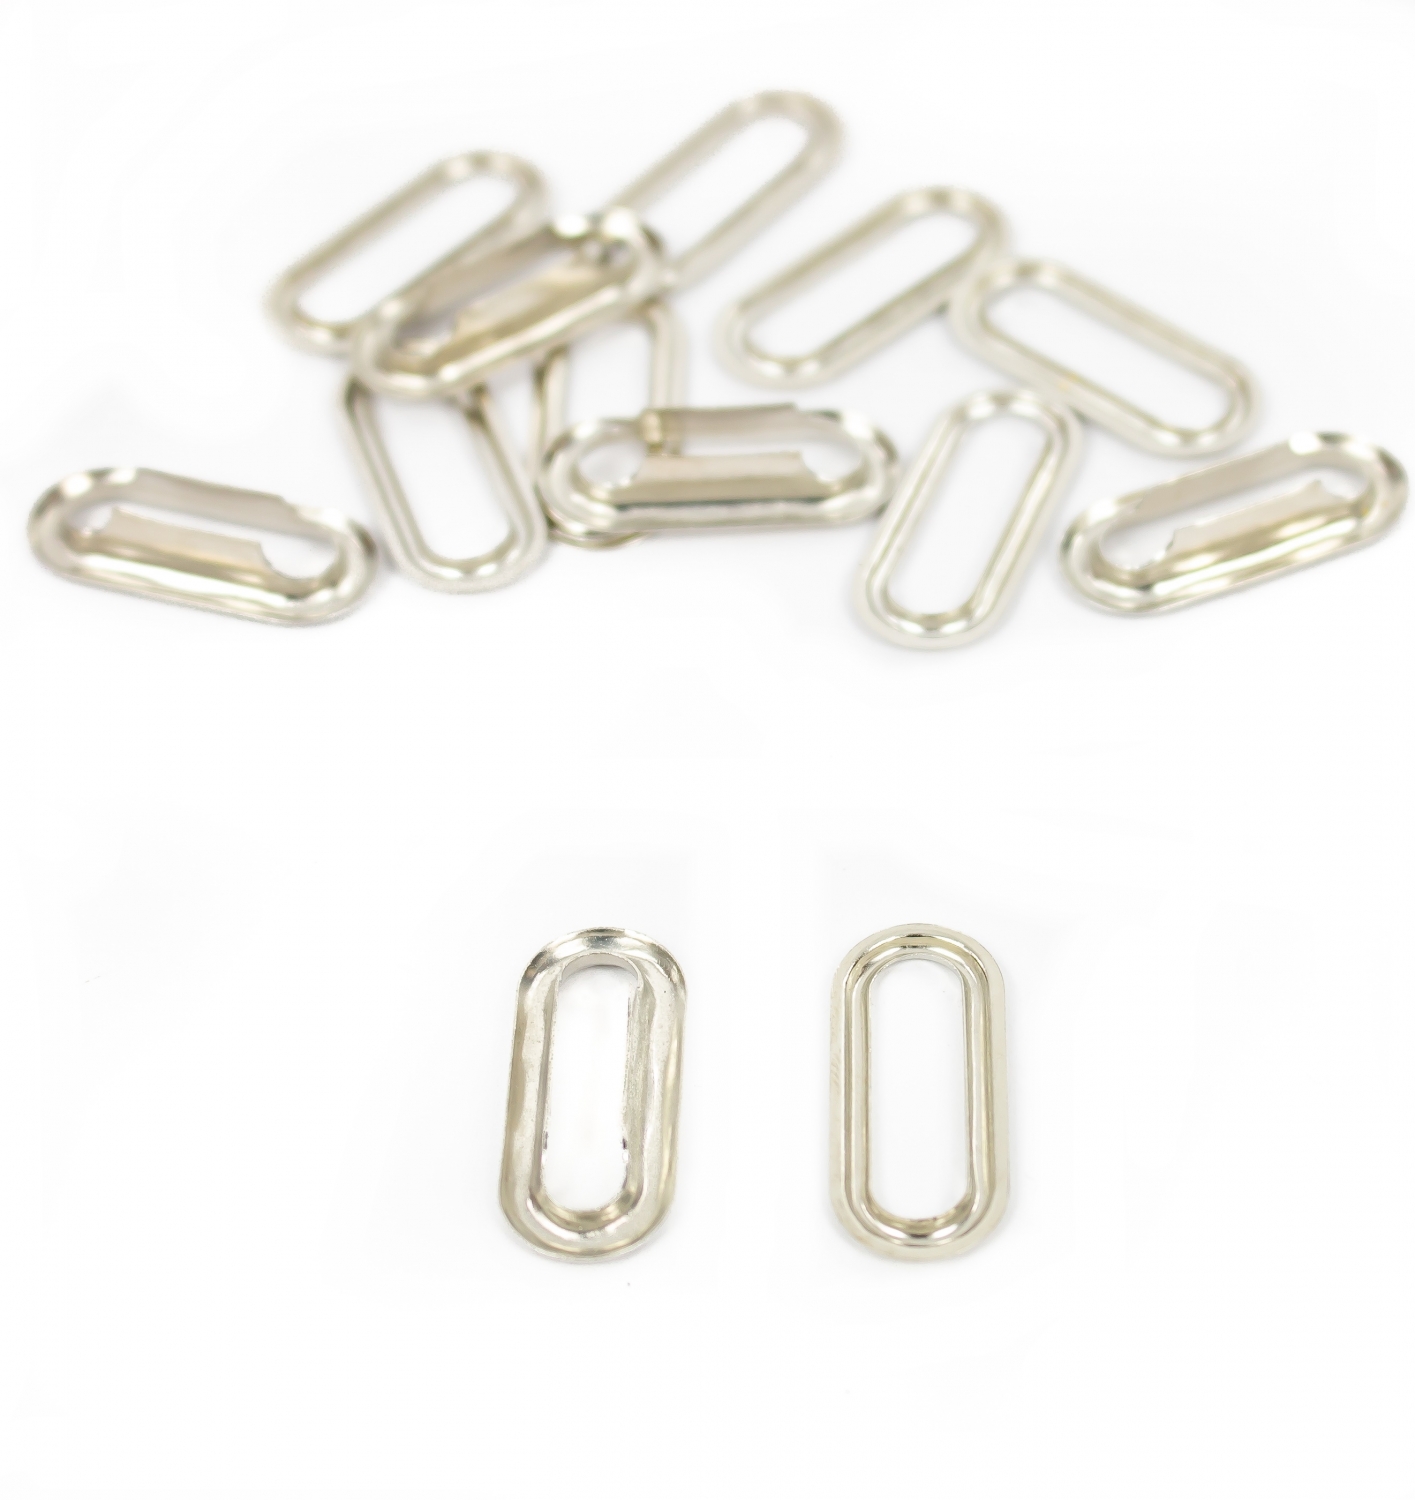 Oval Eyelets and Washers, Metal (200 sets/pack)Code: KS-PK0020